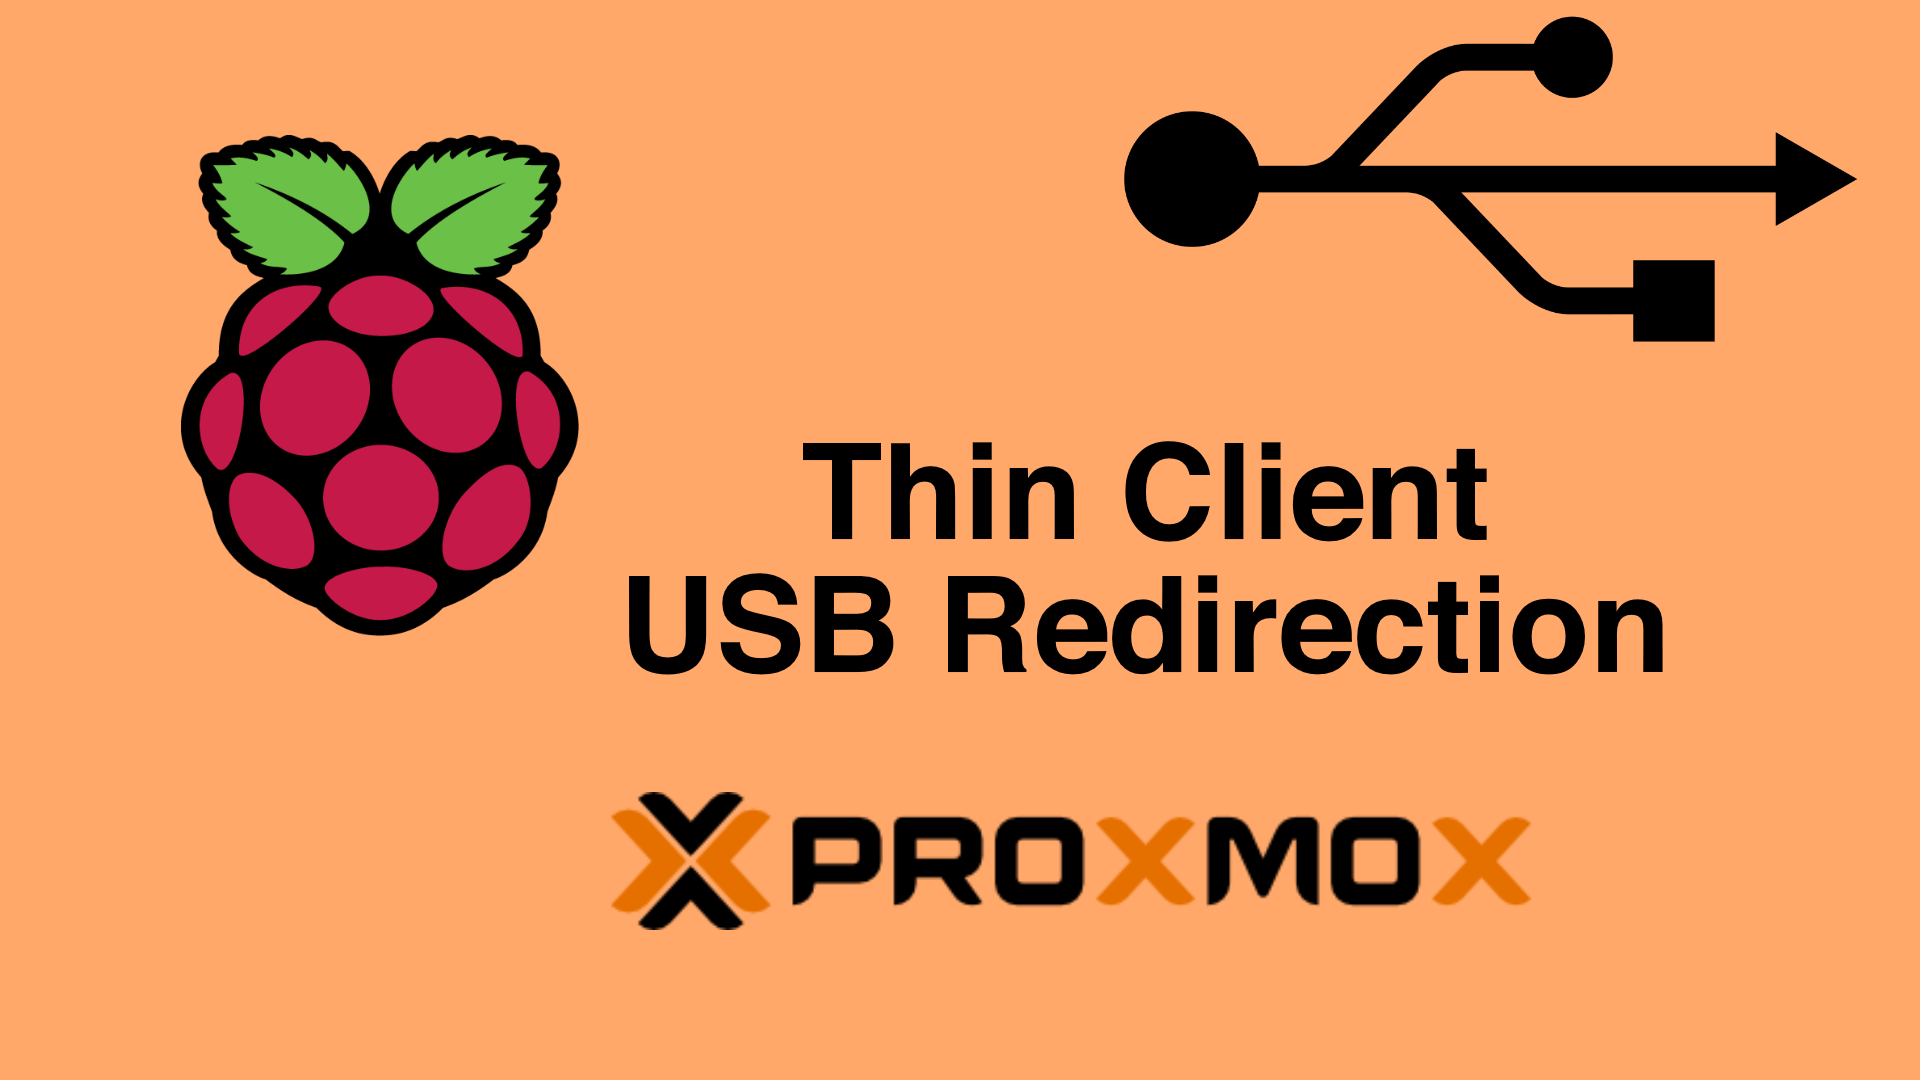 USB Pass Through for the Raspberry Pi Thin Client